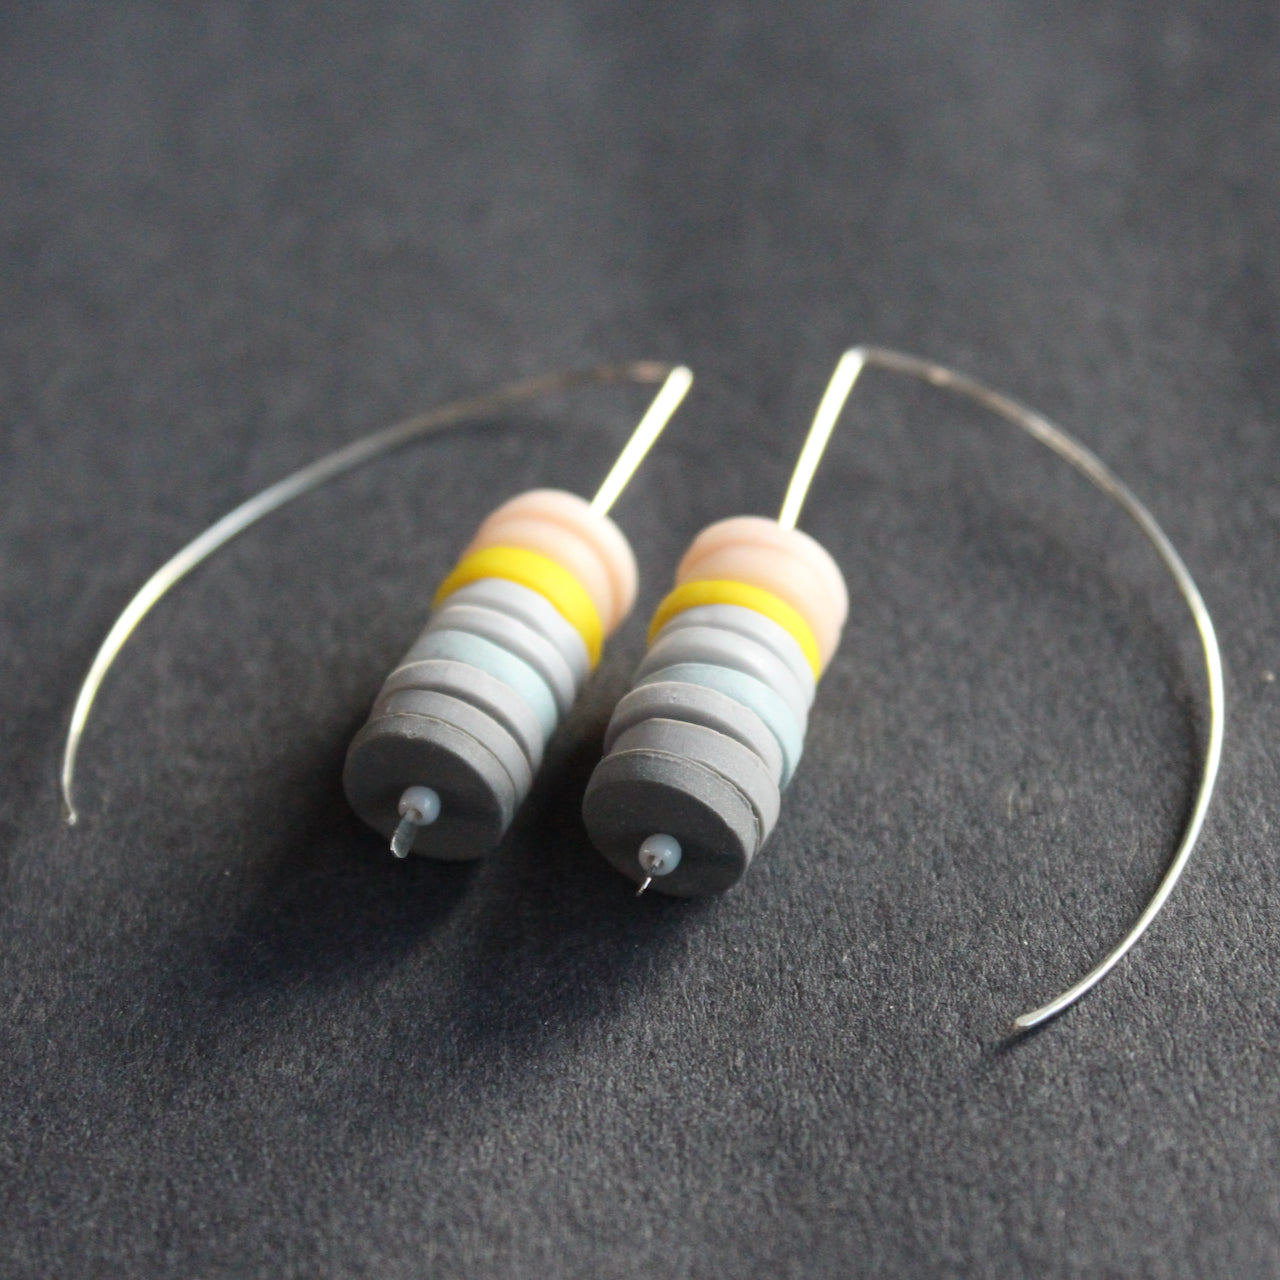 a pair of earrings made of small discs on top of each other in shades of grey and pink by jewellery designer Clare Lloyd 